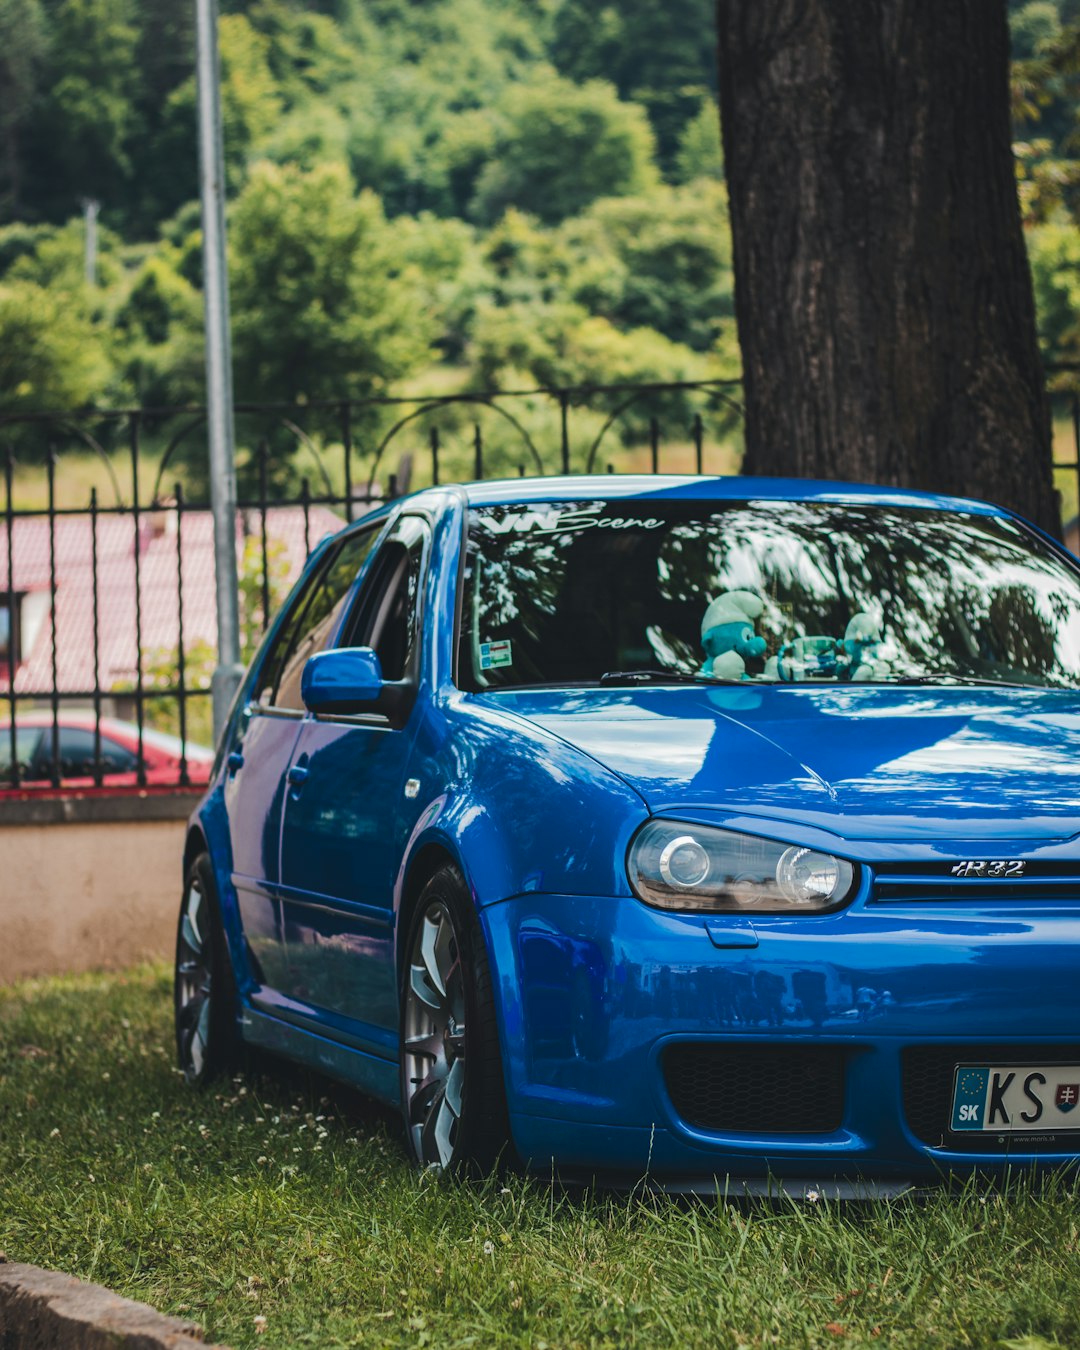 blue bmw m 3 parked on green grass field during daytime